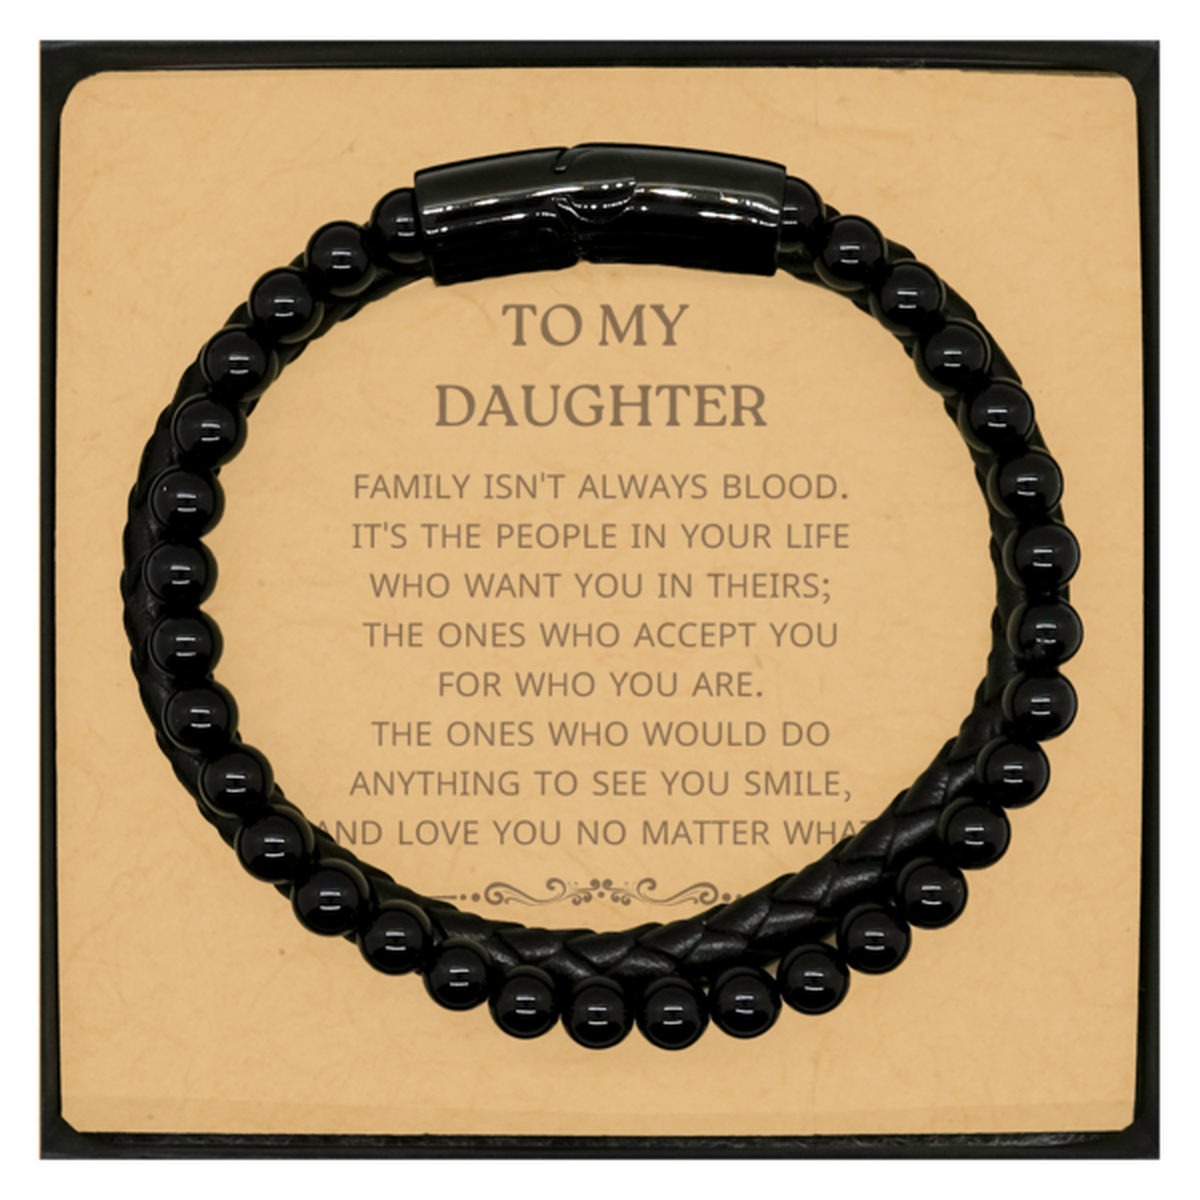 To My Daughter Gifts, Family isn't always blood, Daughter Stone Leather Bracelets, Birthday Christmas Unique Present For Daughter